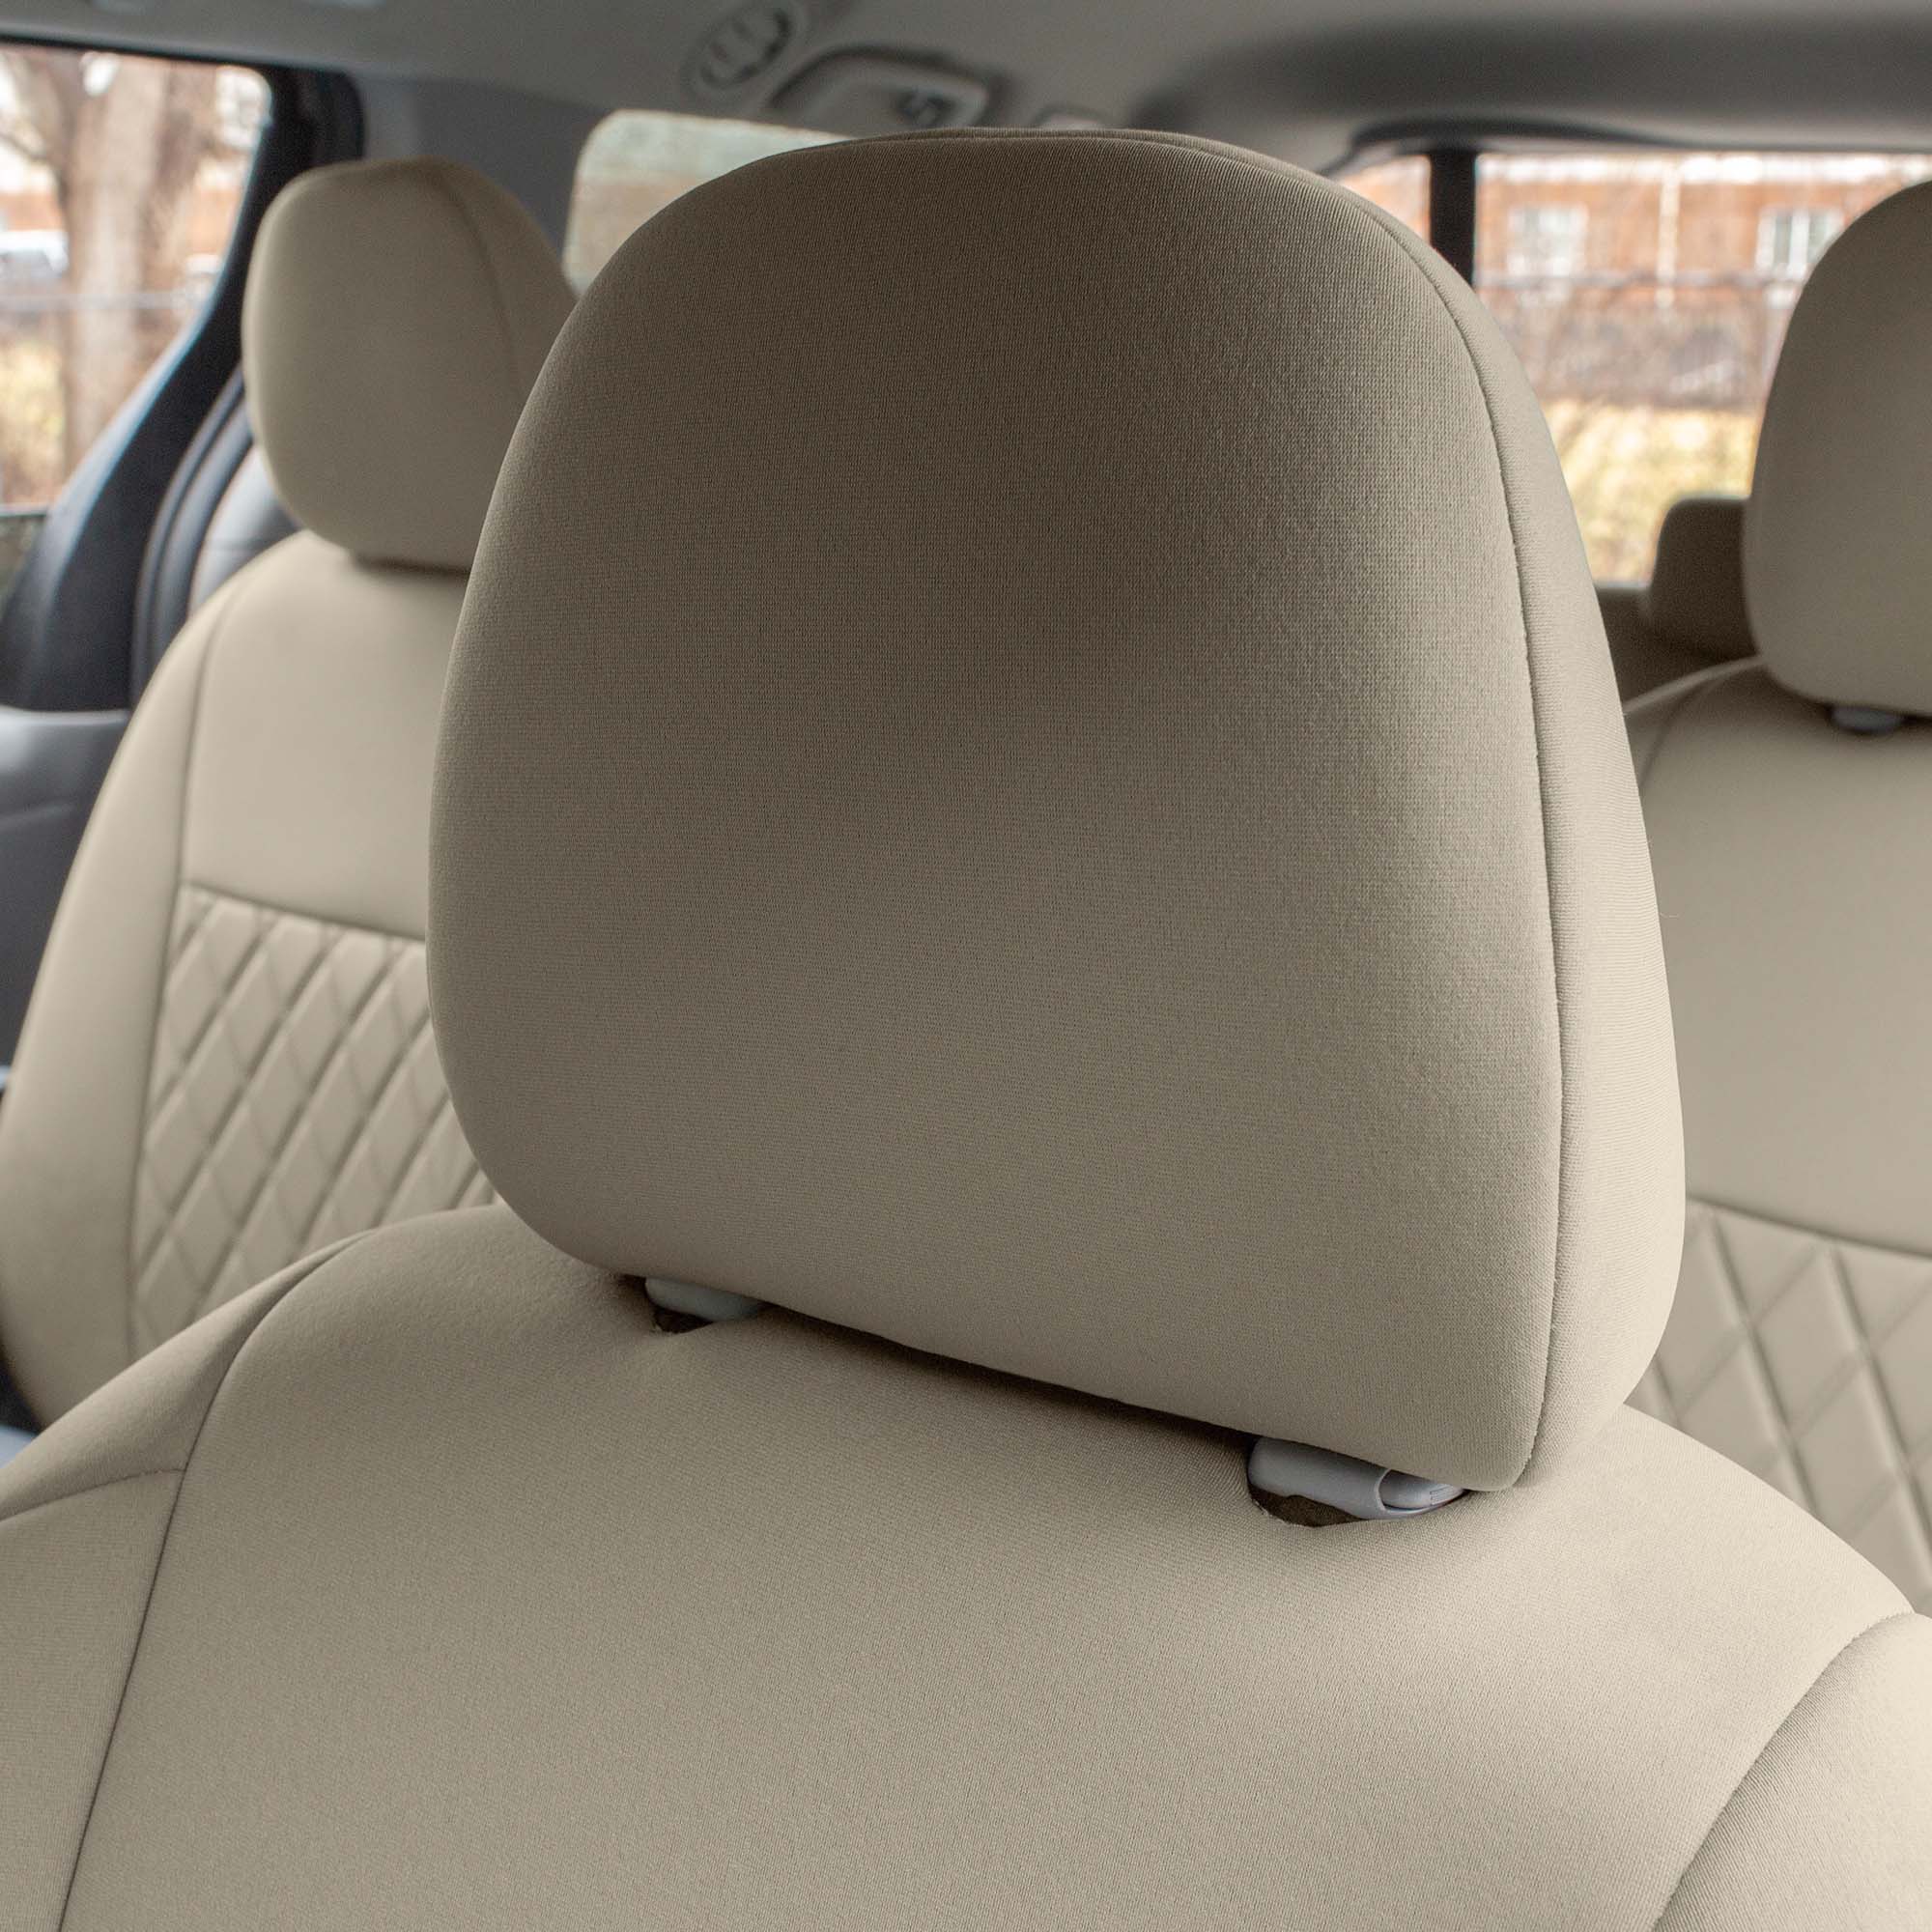 FH Group Custom Fit Car Seat Covers for Toyota Sienna 2011-2020, Car Seat  Cover Full Set, Automotive Seat Covers in COLOR Neoprene, Waterproof and  Washable Seat Covers Solid Beige